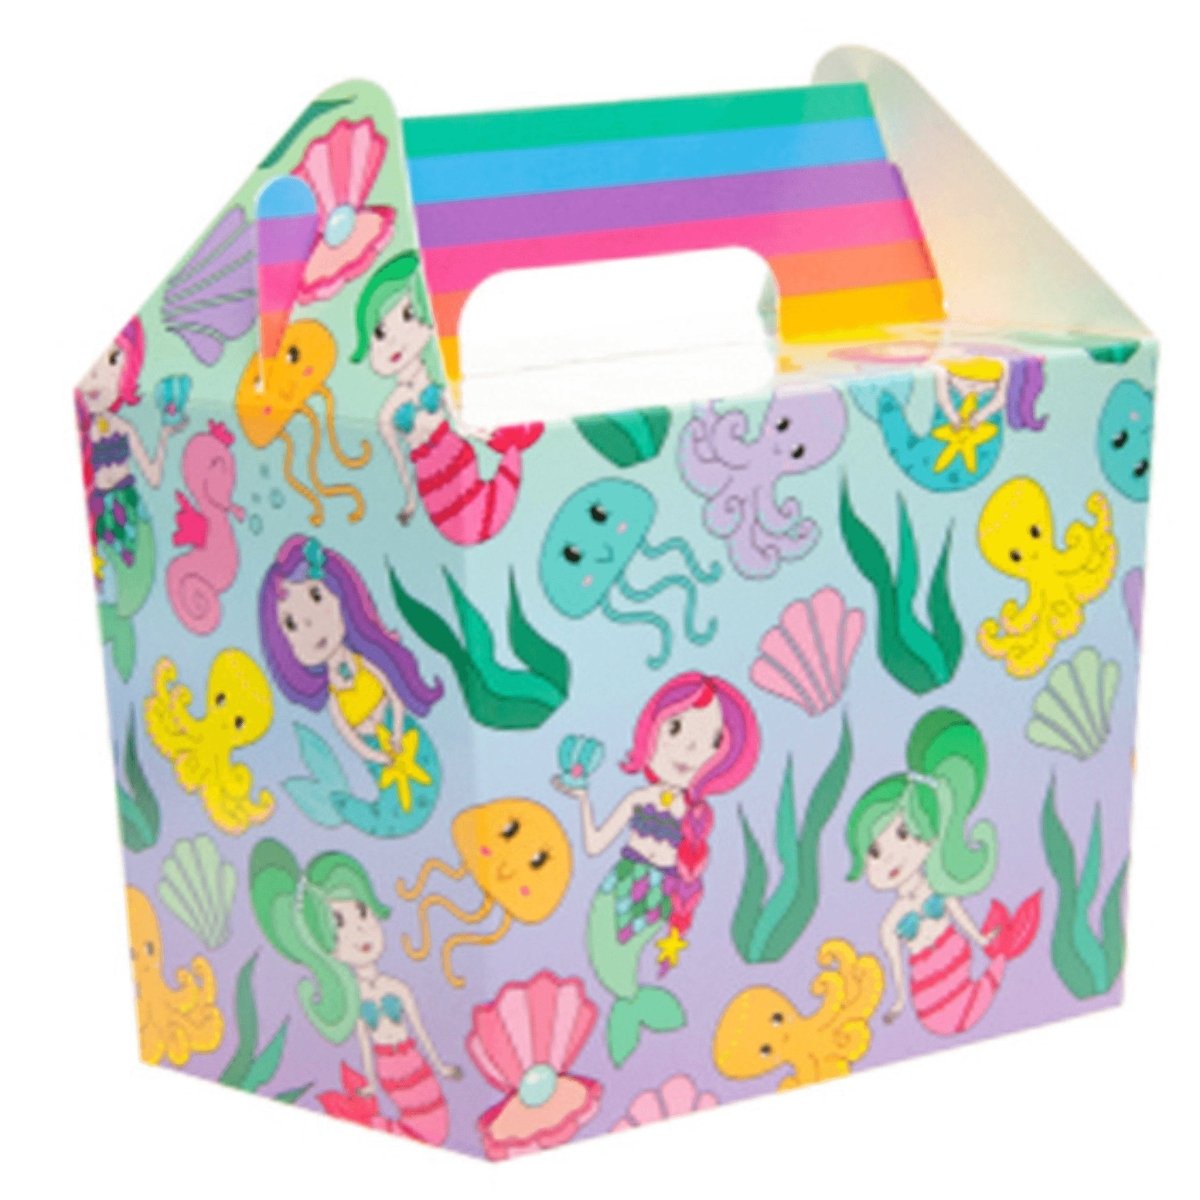 Mermaid Party Food Boxes - Kids Party Craft